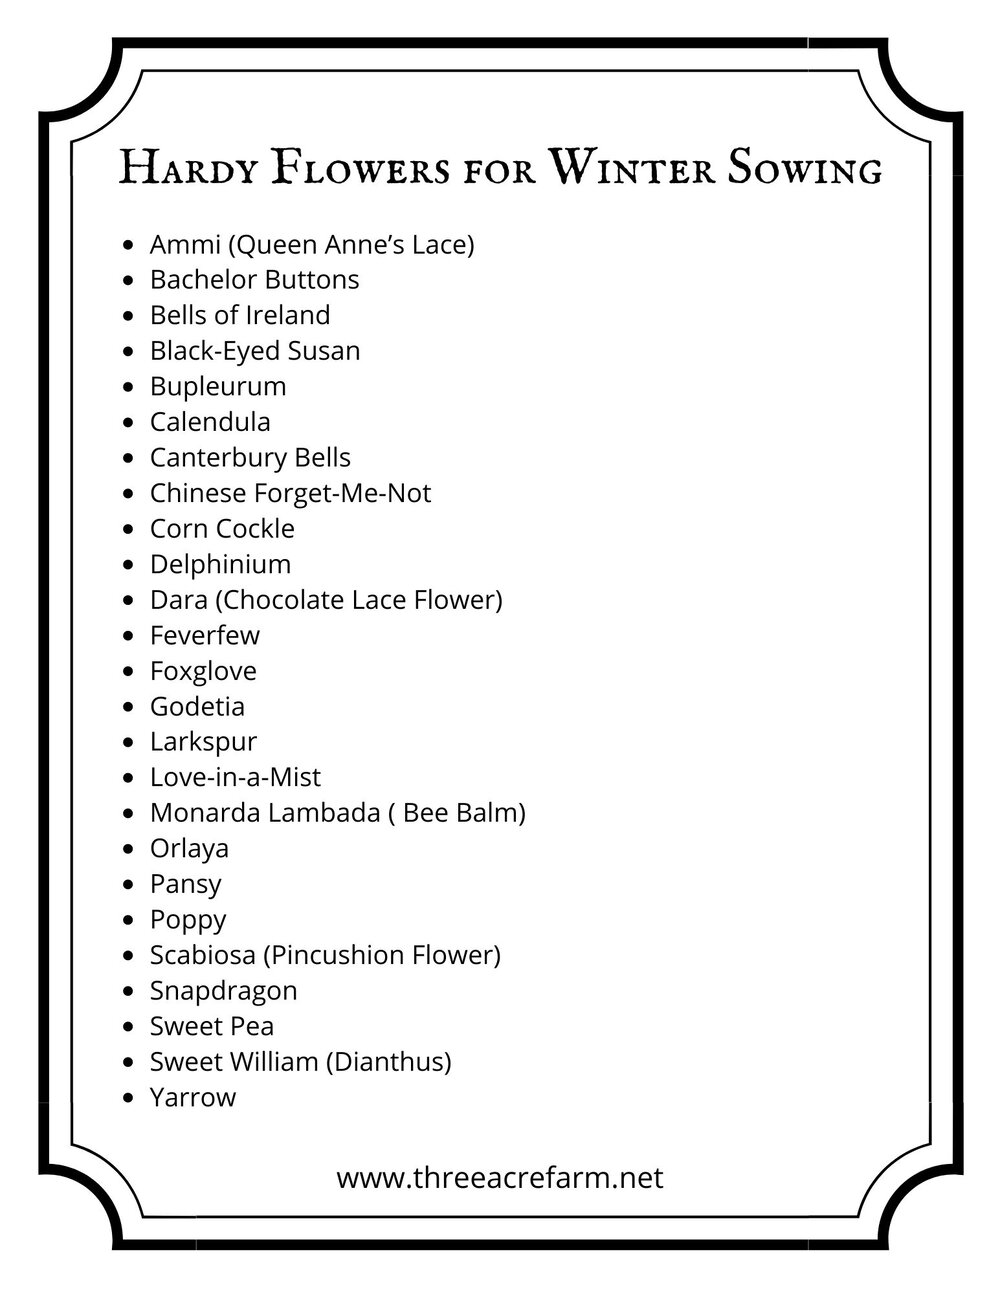 Hardy Flowers for Winter Sowing.jpg